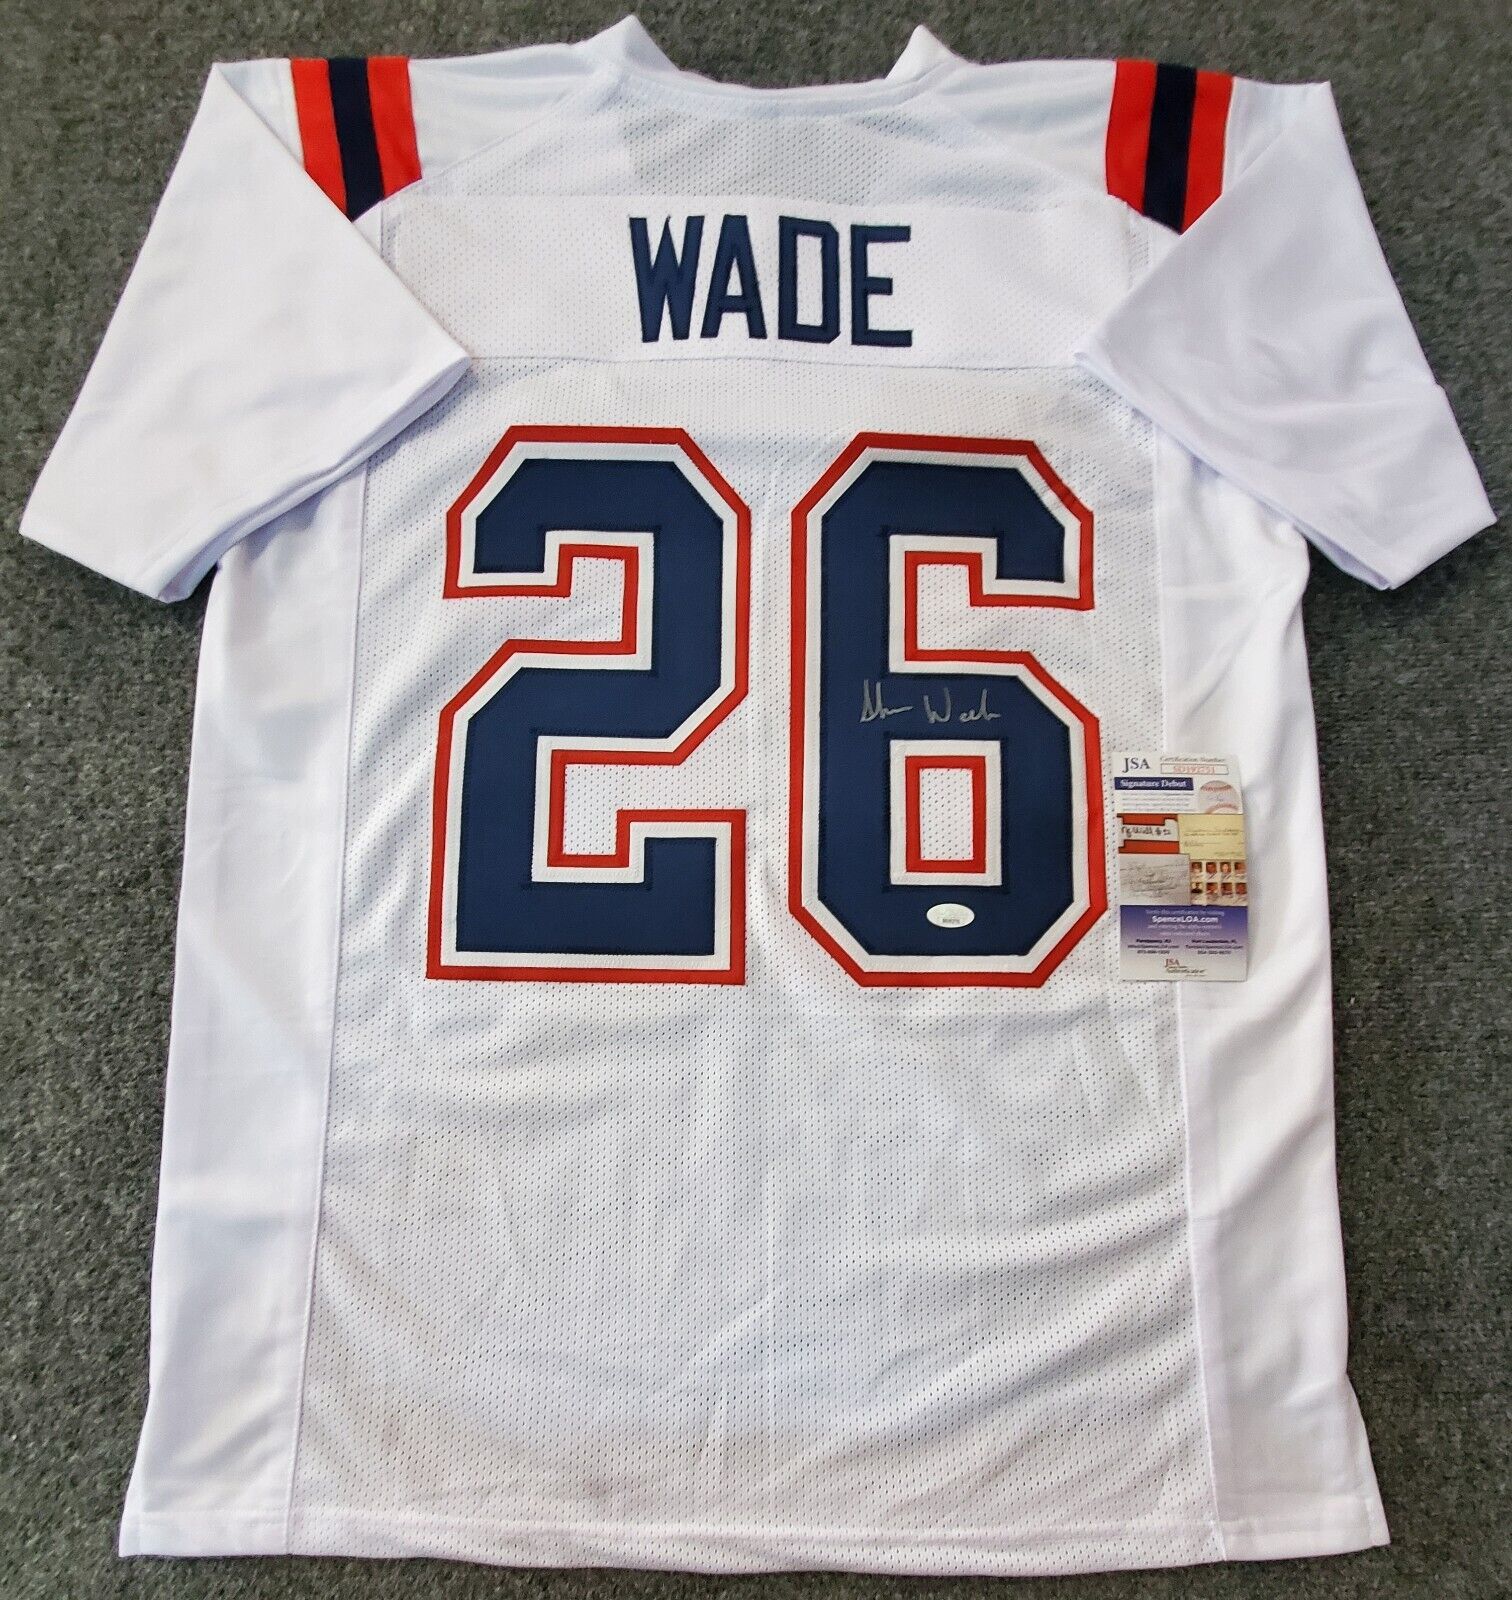 wade autographed jersey